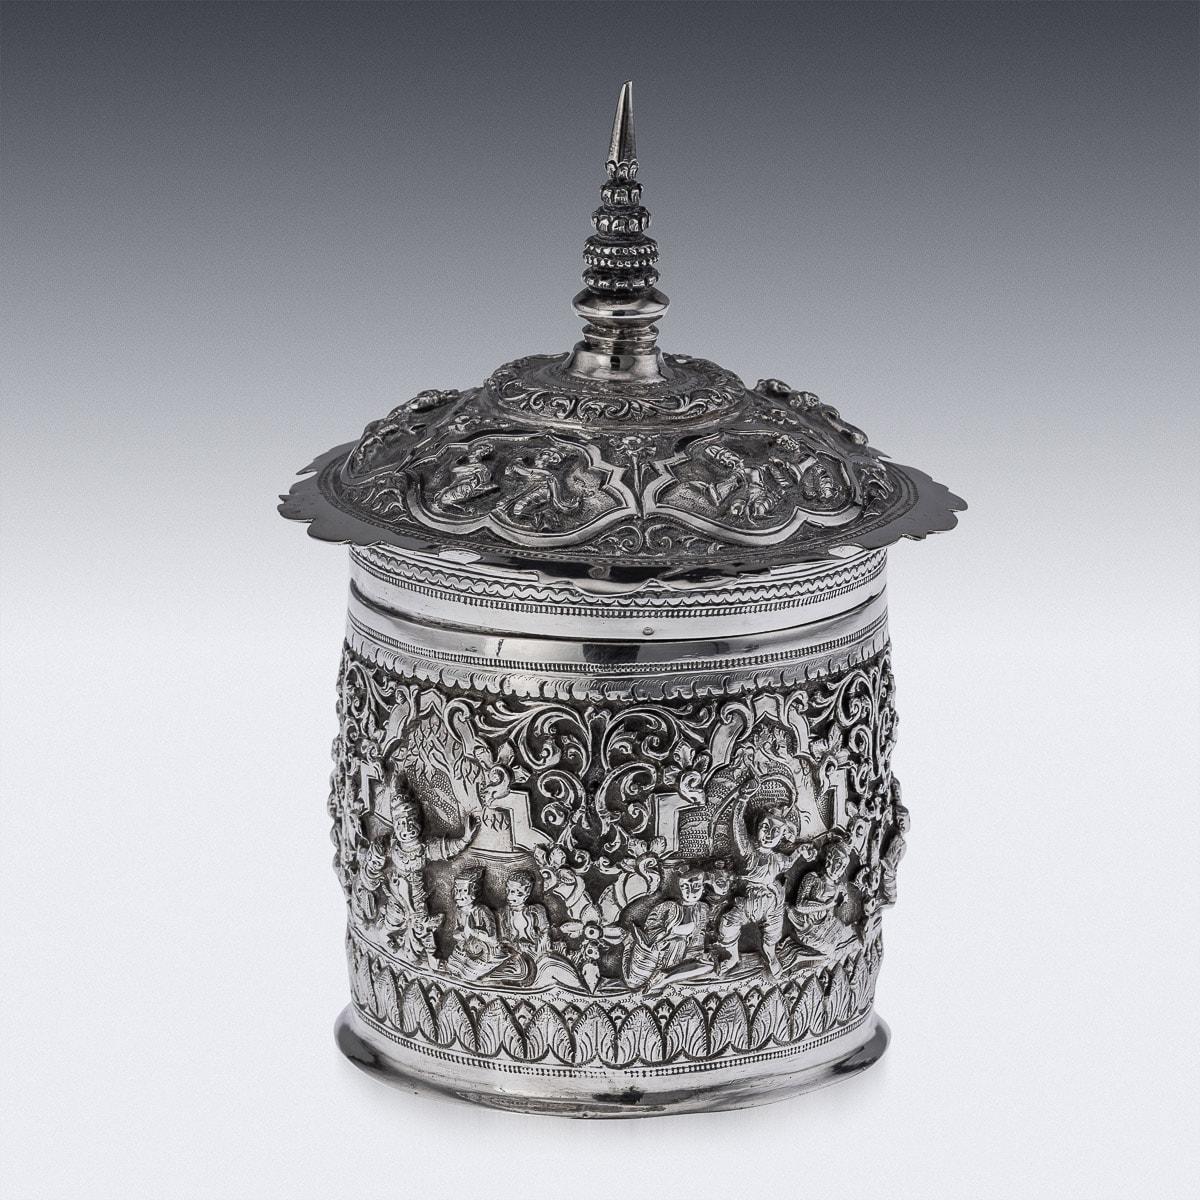 Antique early-20th Century Burmese solid silver betel box, highly-decorative, repousse' decorated in high relief depicting different traditional scenes from the Burmese mythology, showing very detailed figures set against a chiselled matted